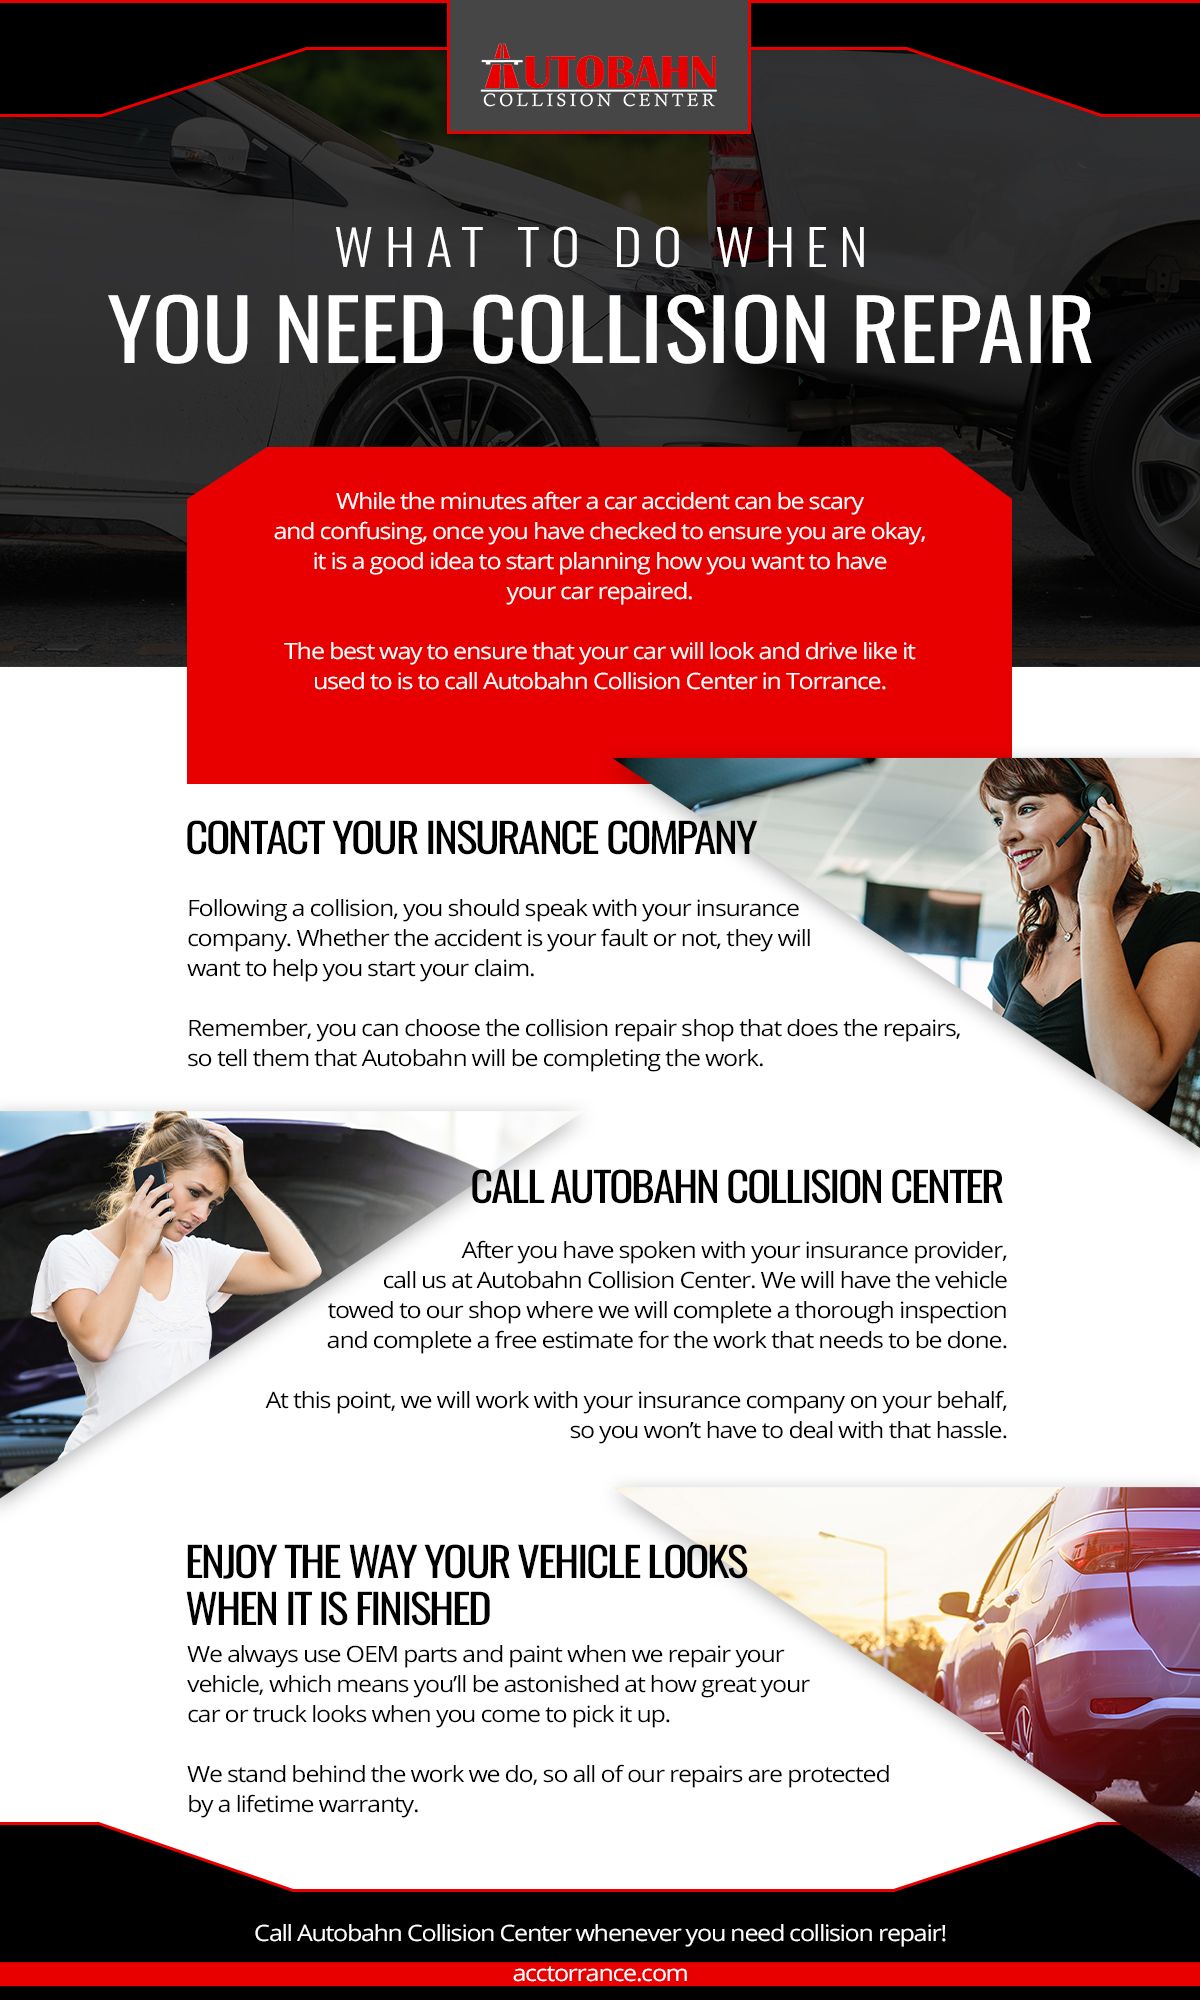 autobahncollisioncenter-infographic-What-to-Do-When-You-Need-Collision-Repair-5c87cfcfdeca6.jpg